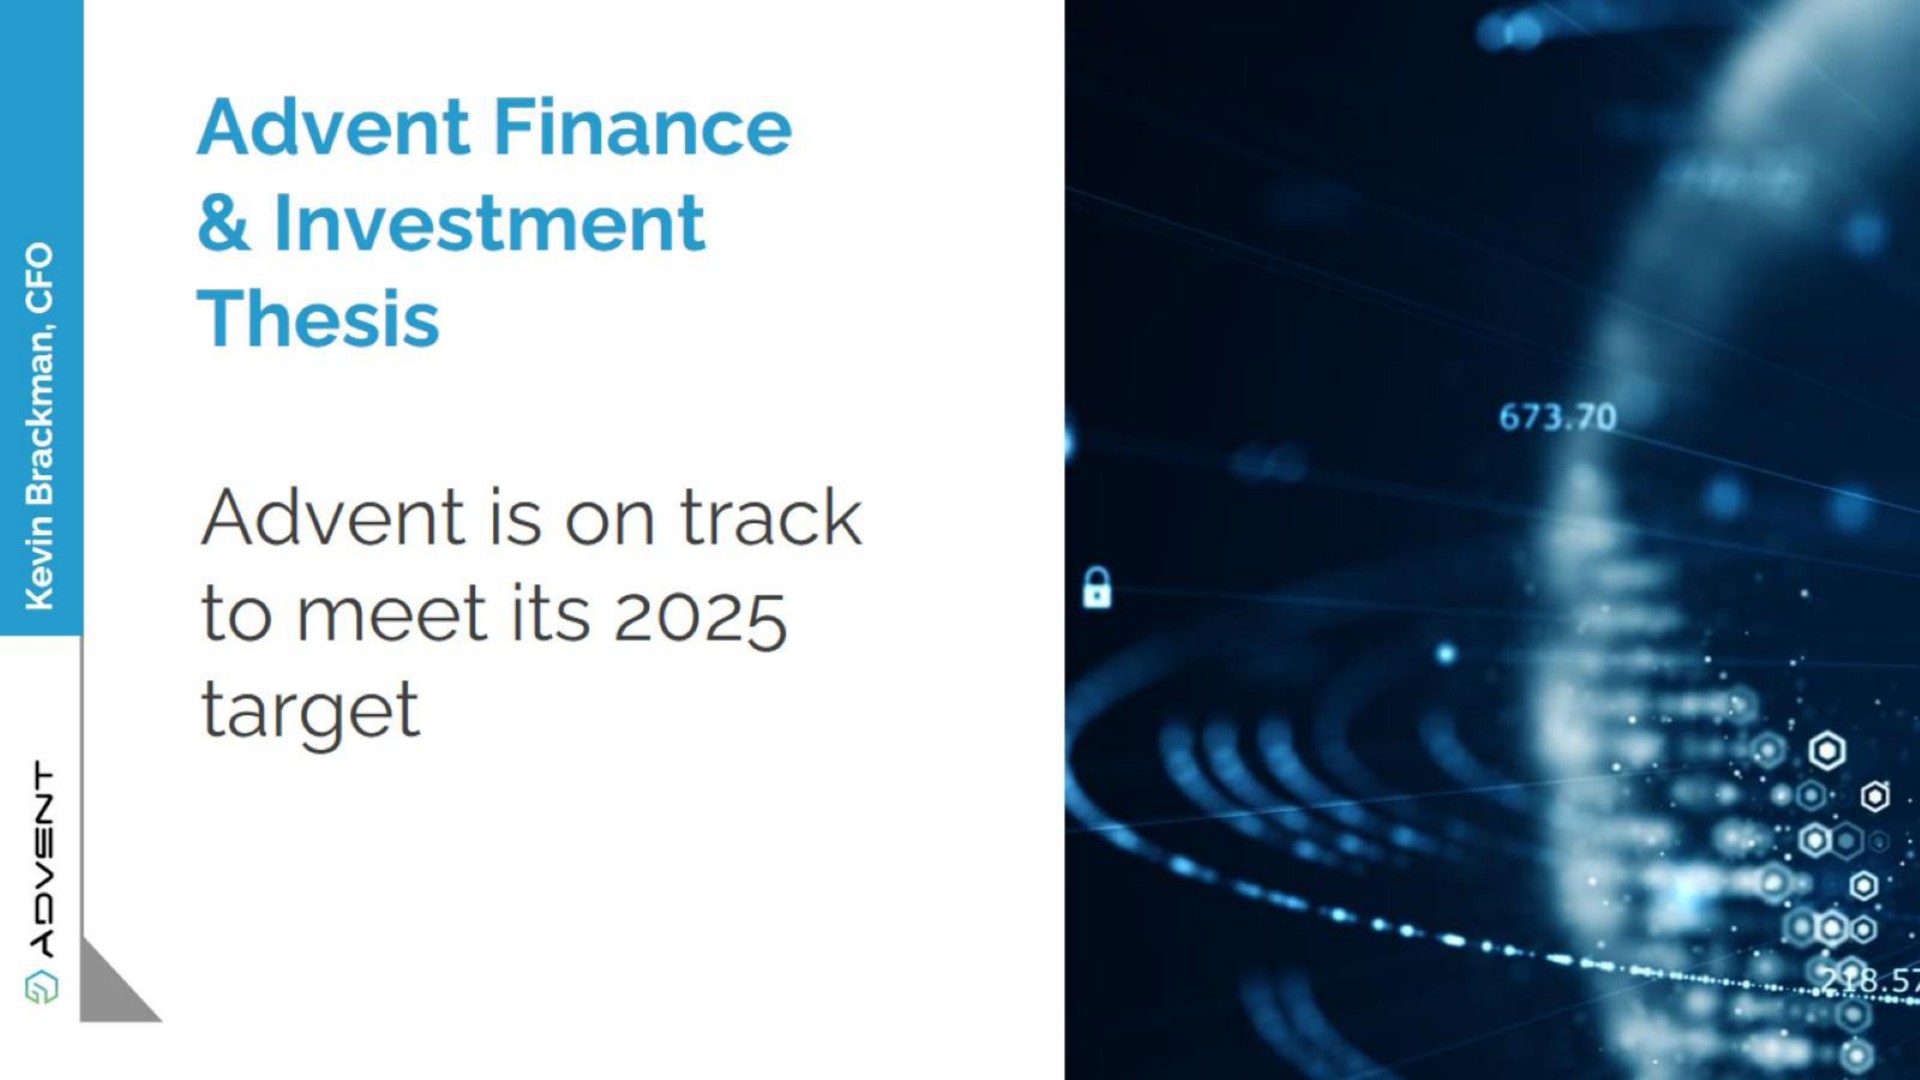 finance investment thesis is on track to meet its target | Advent